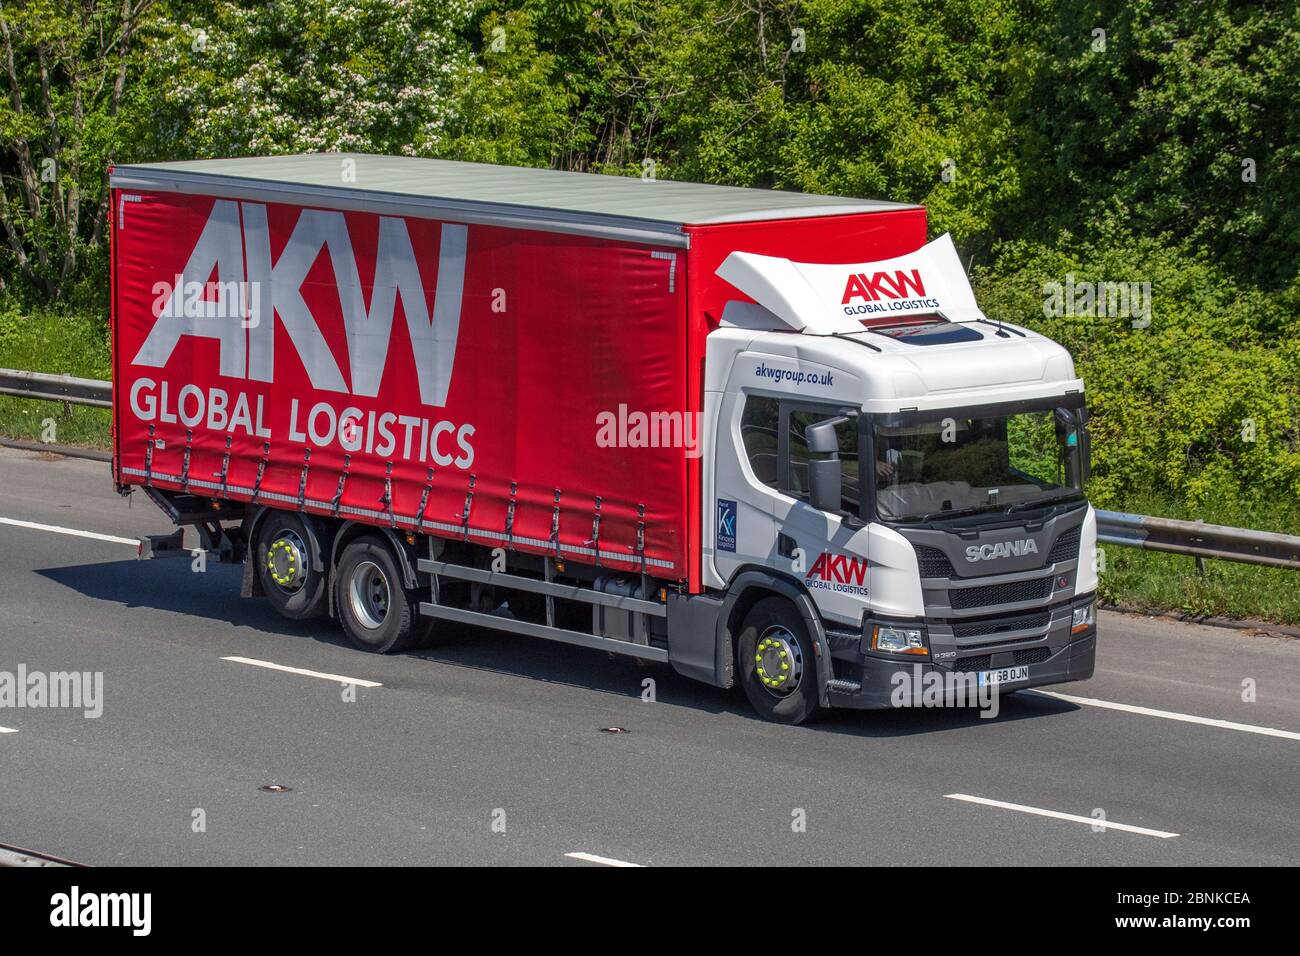 AKW GLOBAL LOGISTICS; Haulage delivery trucks, lorry, transportation, truck, cargo carrier, Scania curtain sided lorry, curtainsider, trailers,  tautliner vehicle, European commercial transport, industry, M6 at Manchester, UK Stock Photo